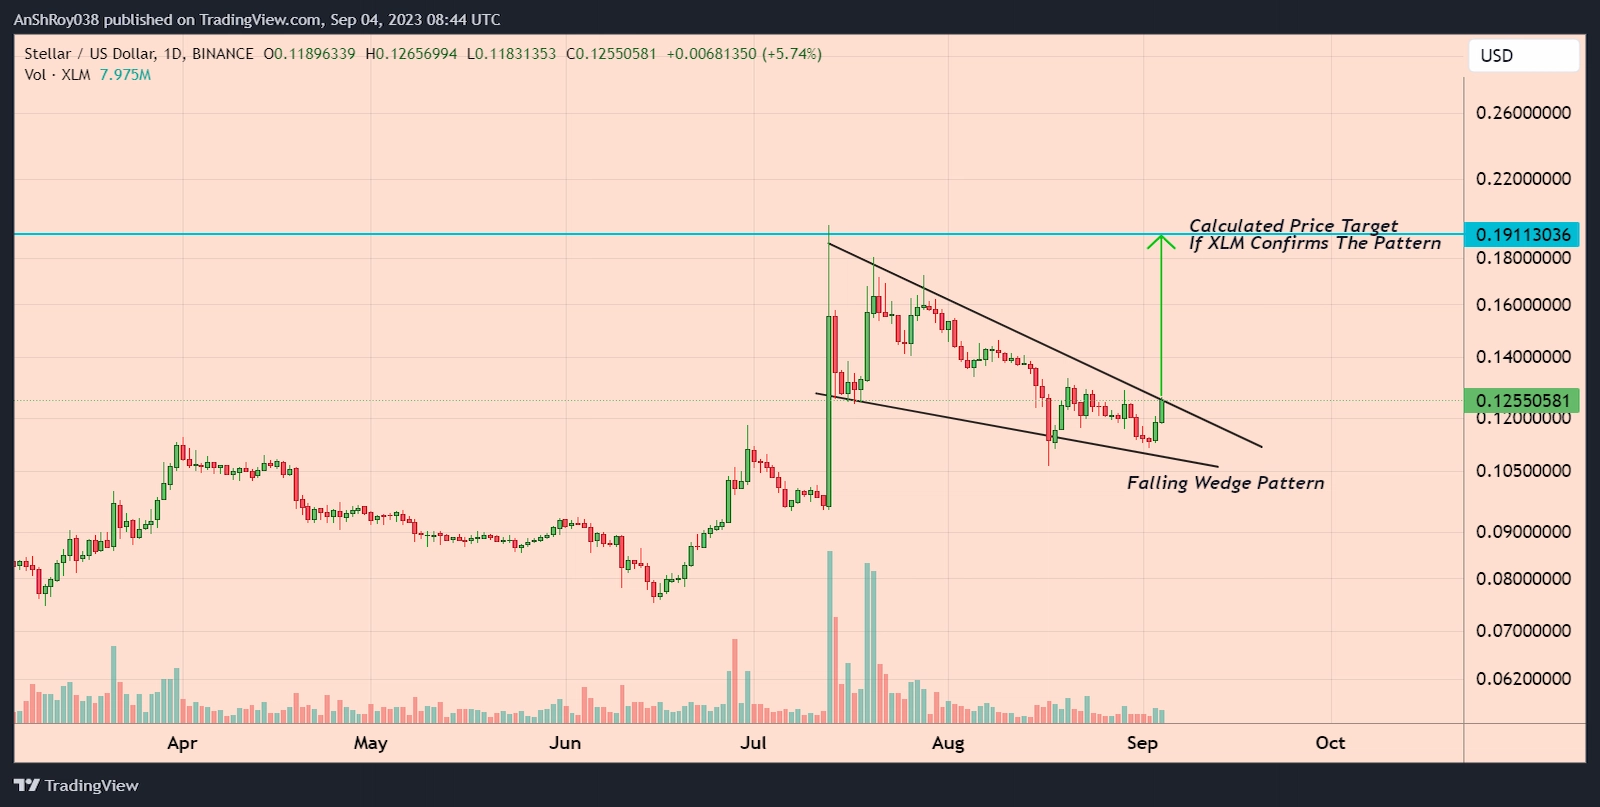 XLM price formed a bullish technical pattern with an over 52% price target.